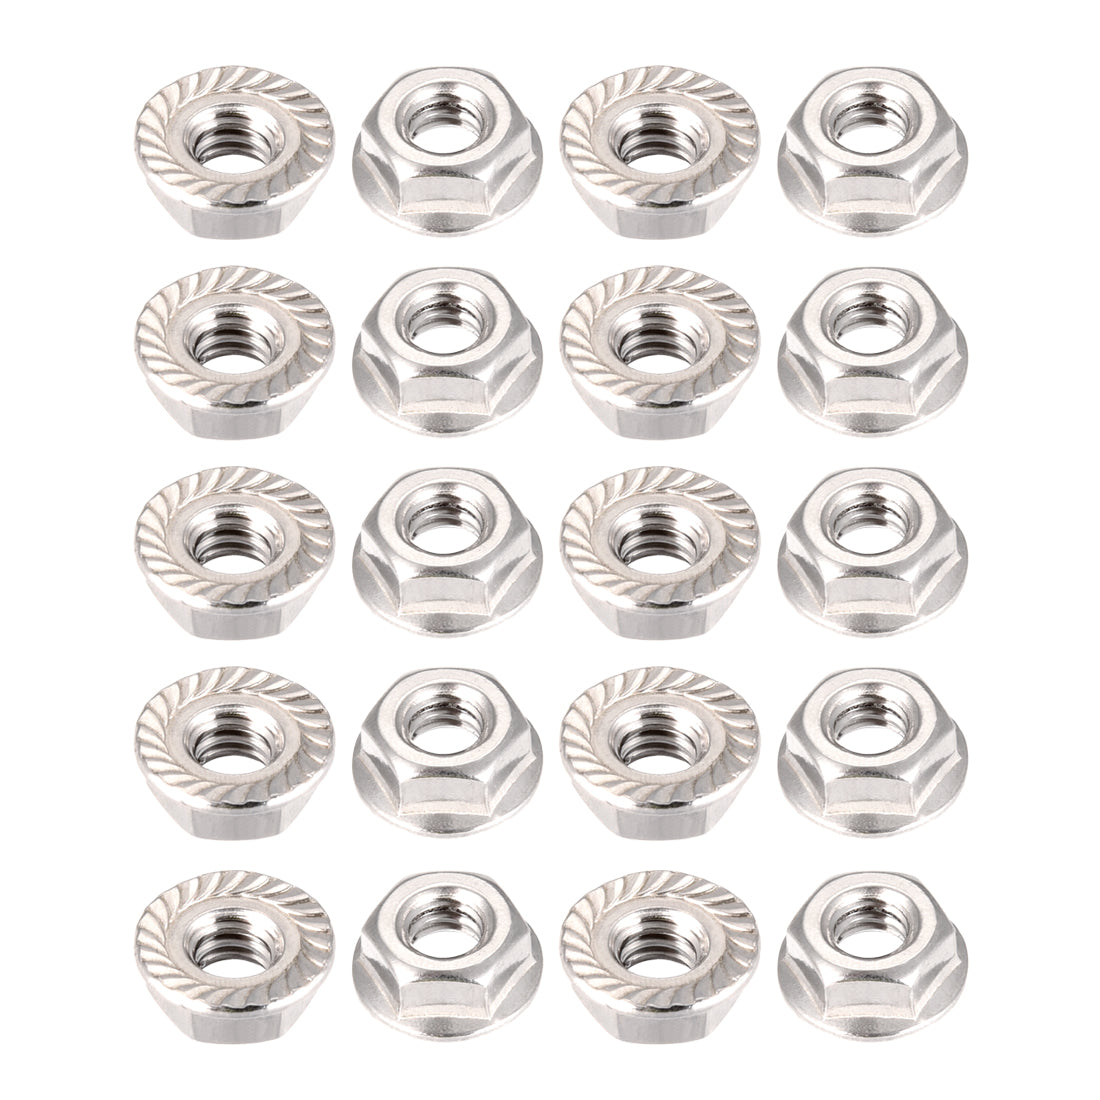 Uxcell Uxcell #6-32 Serrated Flange Hex Lock Nuts, 304 Stainless Steel, 20 Pcs